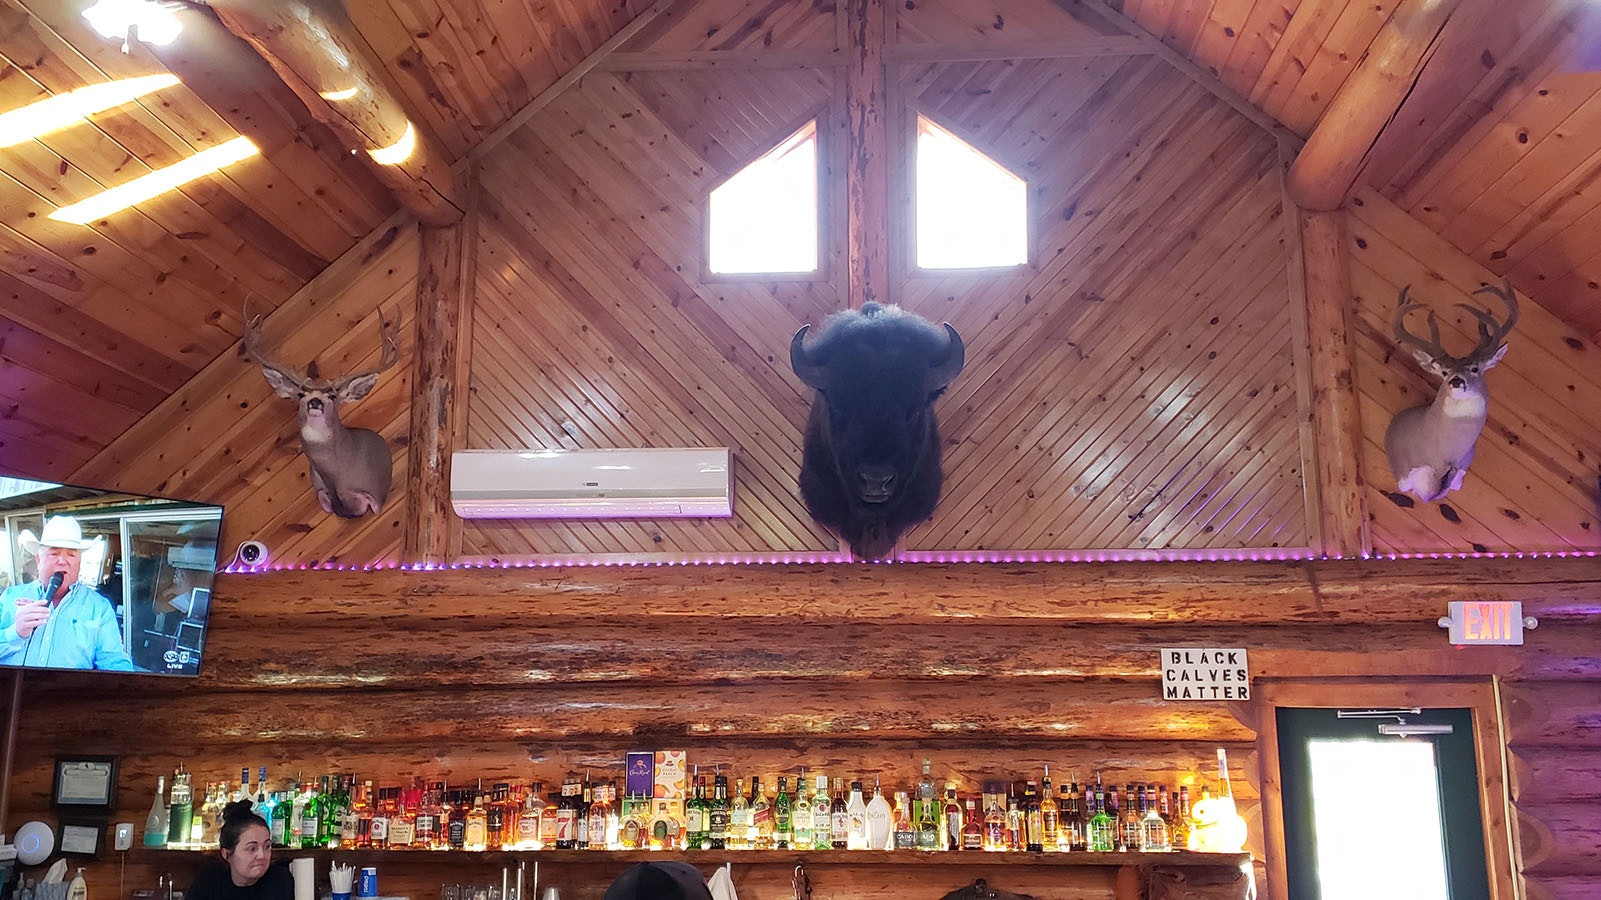 A variety of liquor is stocked at the bar including some Wyoming favorites like Saddle Bronc Ale.